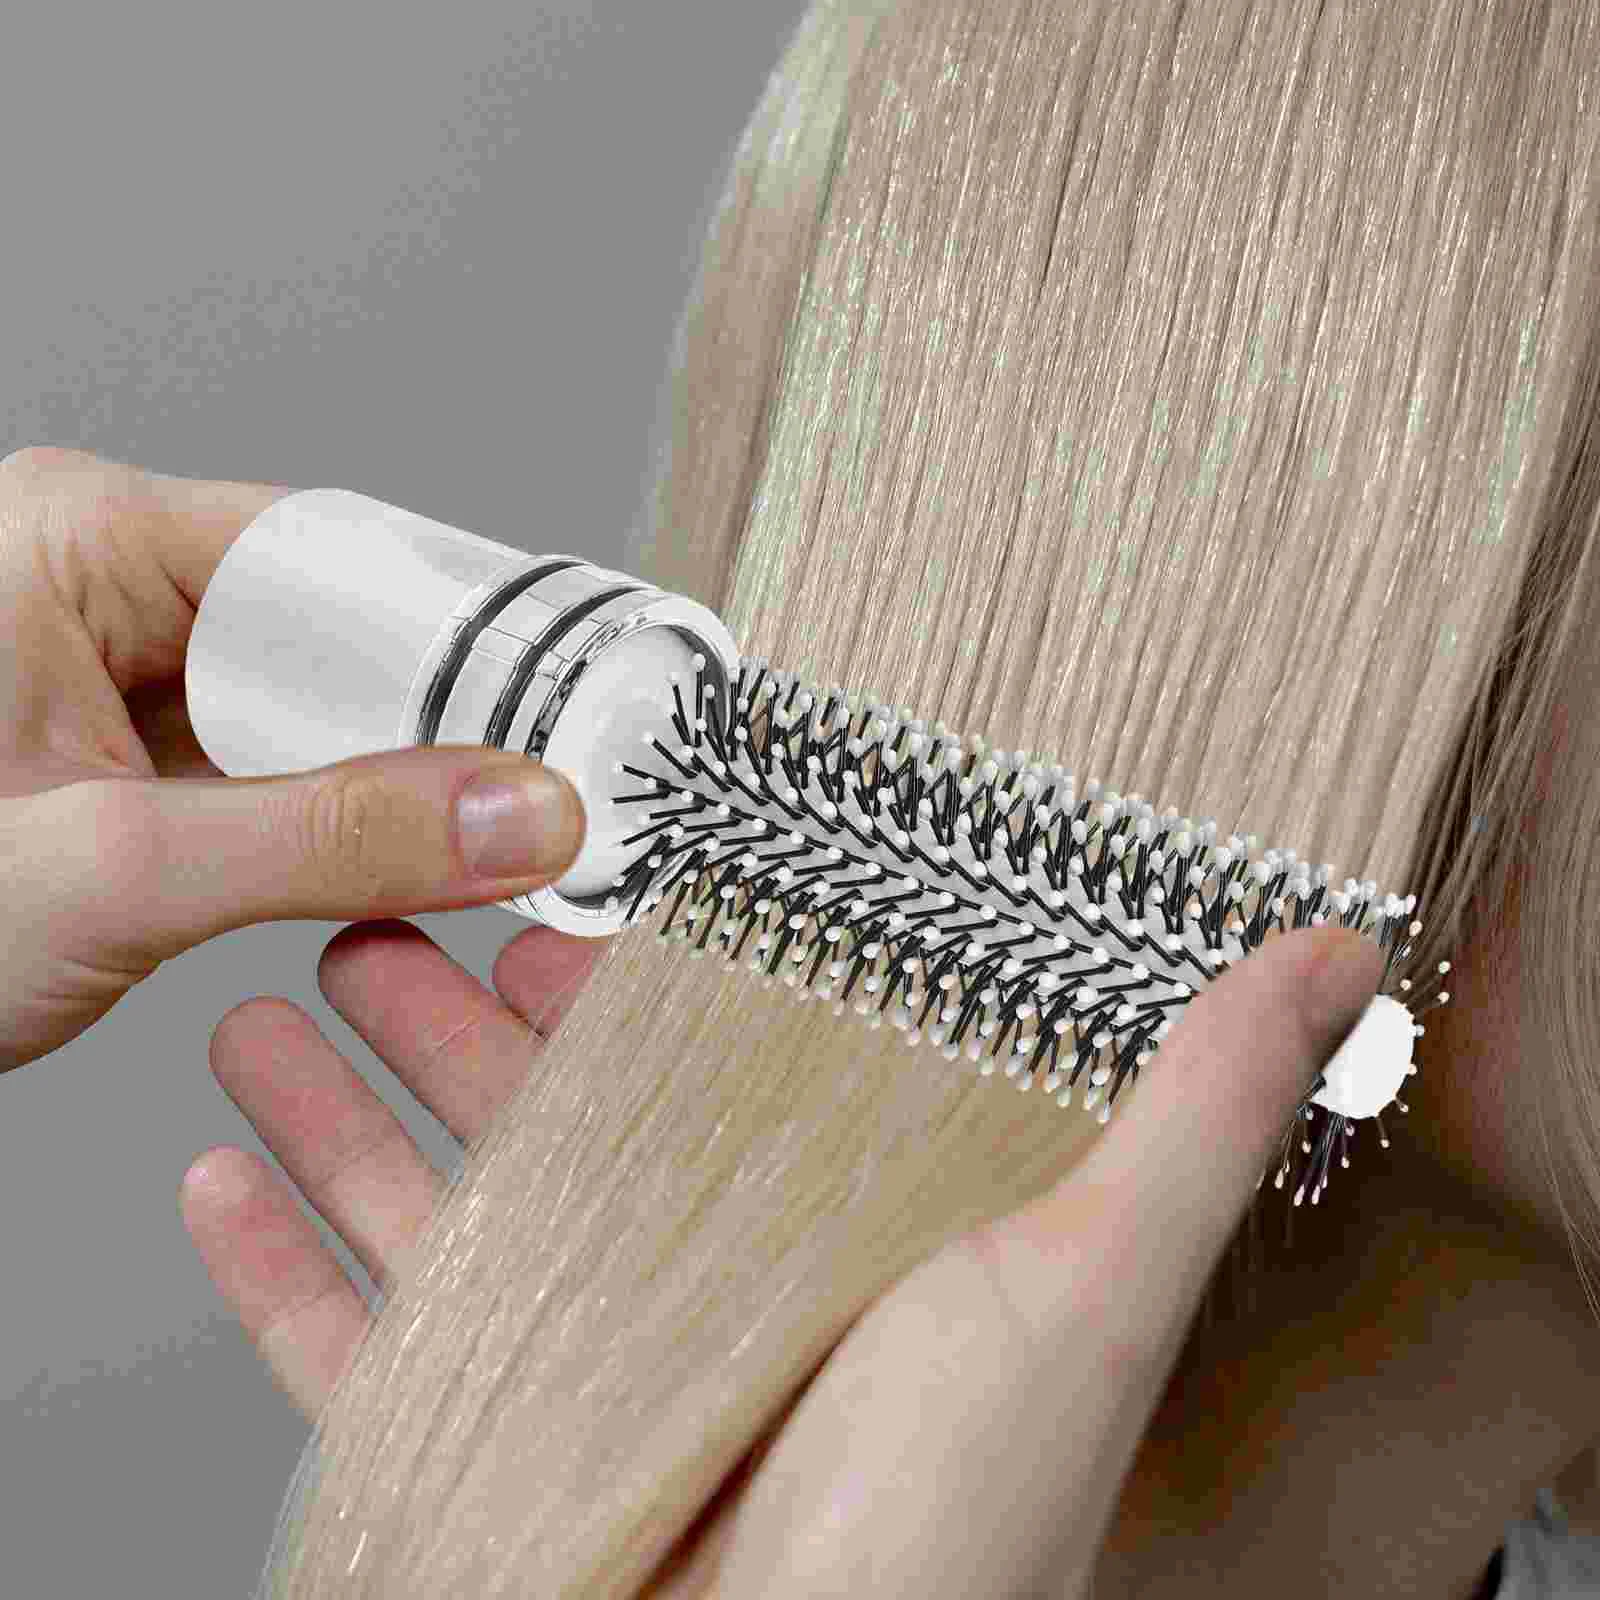 

Roller Round Brush Compact Hair Brush Hair Quiff Roller Comb Retractable Curling Hairbrush Hair Blow Drying Brush Travel Styling